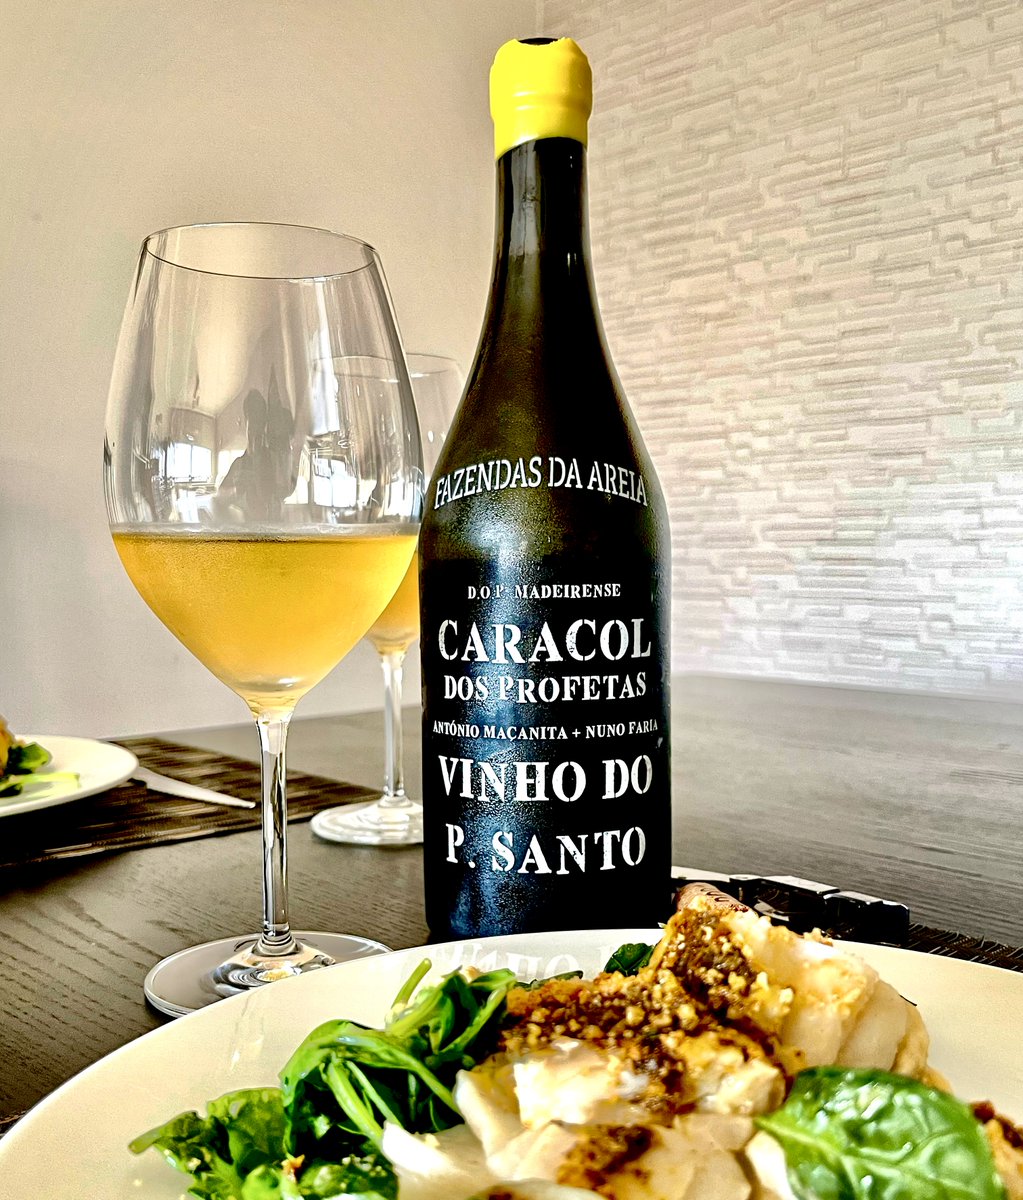 Caracol dos Profetas DOP Madeirense - Another amazing wine made from the rare grape Caracol. Very limited bottles. Perfect pairing with dry cod-fish, chickpea purée, fresh spinach’s and bread crumble. 🤩

#winetasting #wineandfood #winepairing #madeira #sunday #amazingwines